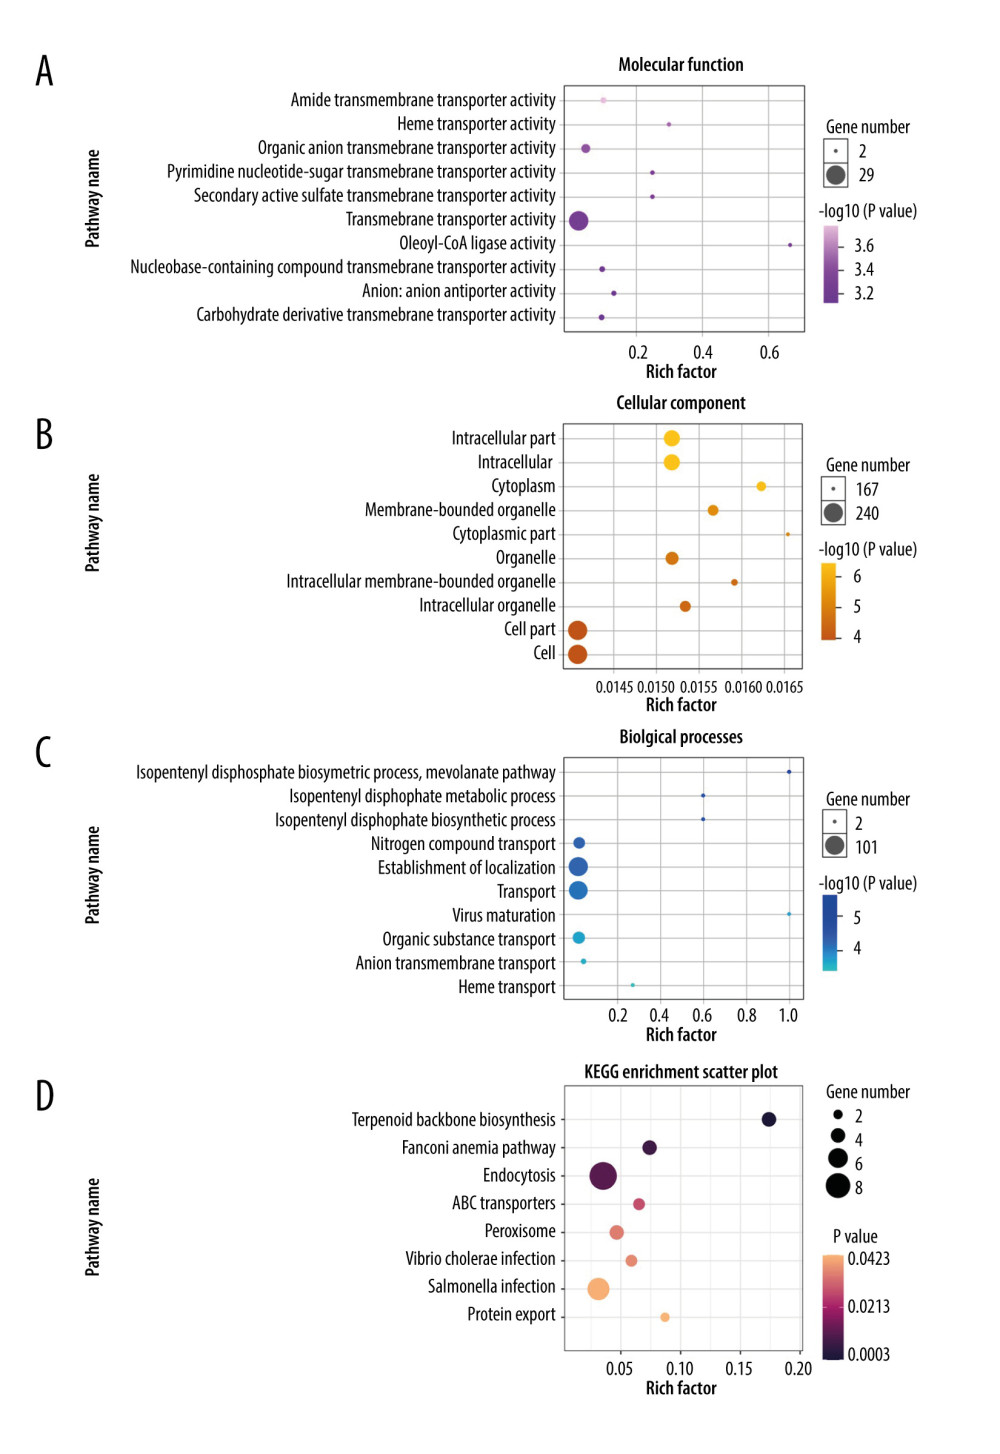 Gene Ontology and KEGG enrichment analysis of 268 differentially expressed genes (DEGs) in severe COVID-19. The top 10 terms in (A) molecular function, (B) cellular component, and (C) biological process category are presented. The total of 8 significant pathways involved in (D) KEGG enrichment are shown using a scatter plot. Colors represent the P values and sizes of the spots represent the counts of genes.